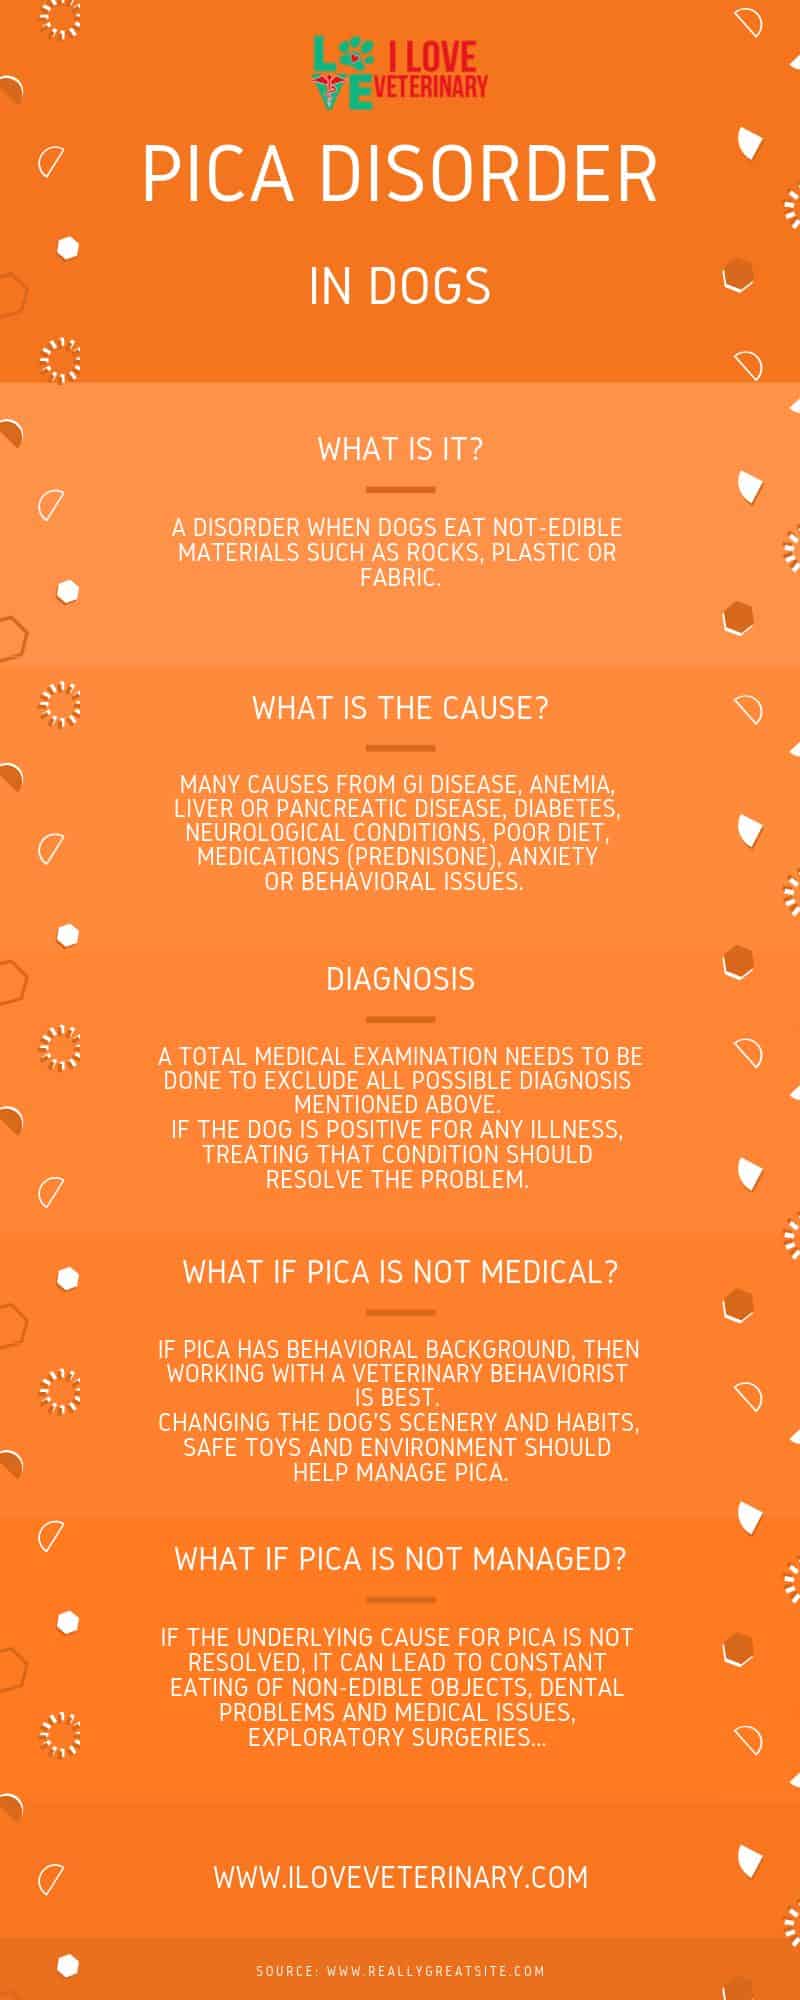 cause of pica disorder